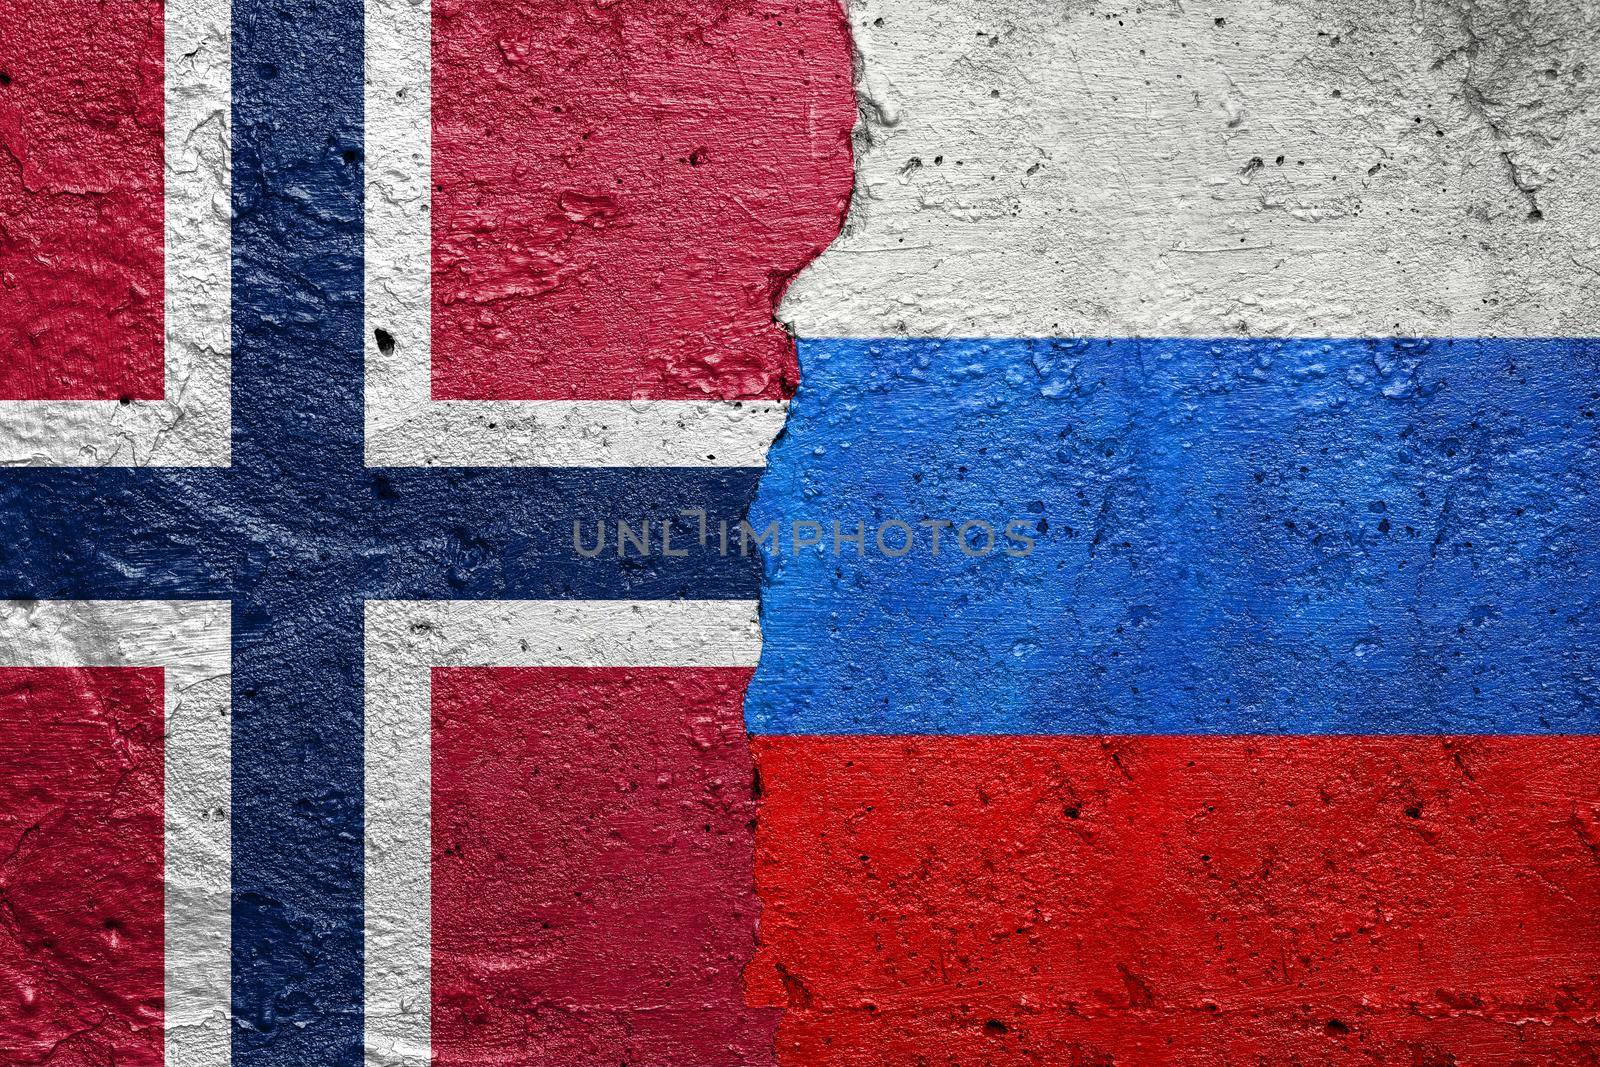 Norway and Russia - Cracked concrete wall painted with a Norwegian flag on the left and a Russian flag on the right stock photo by adamr